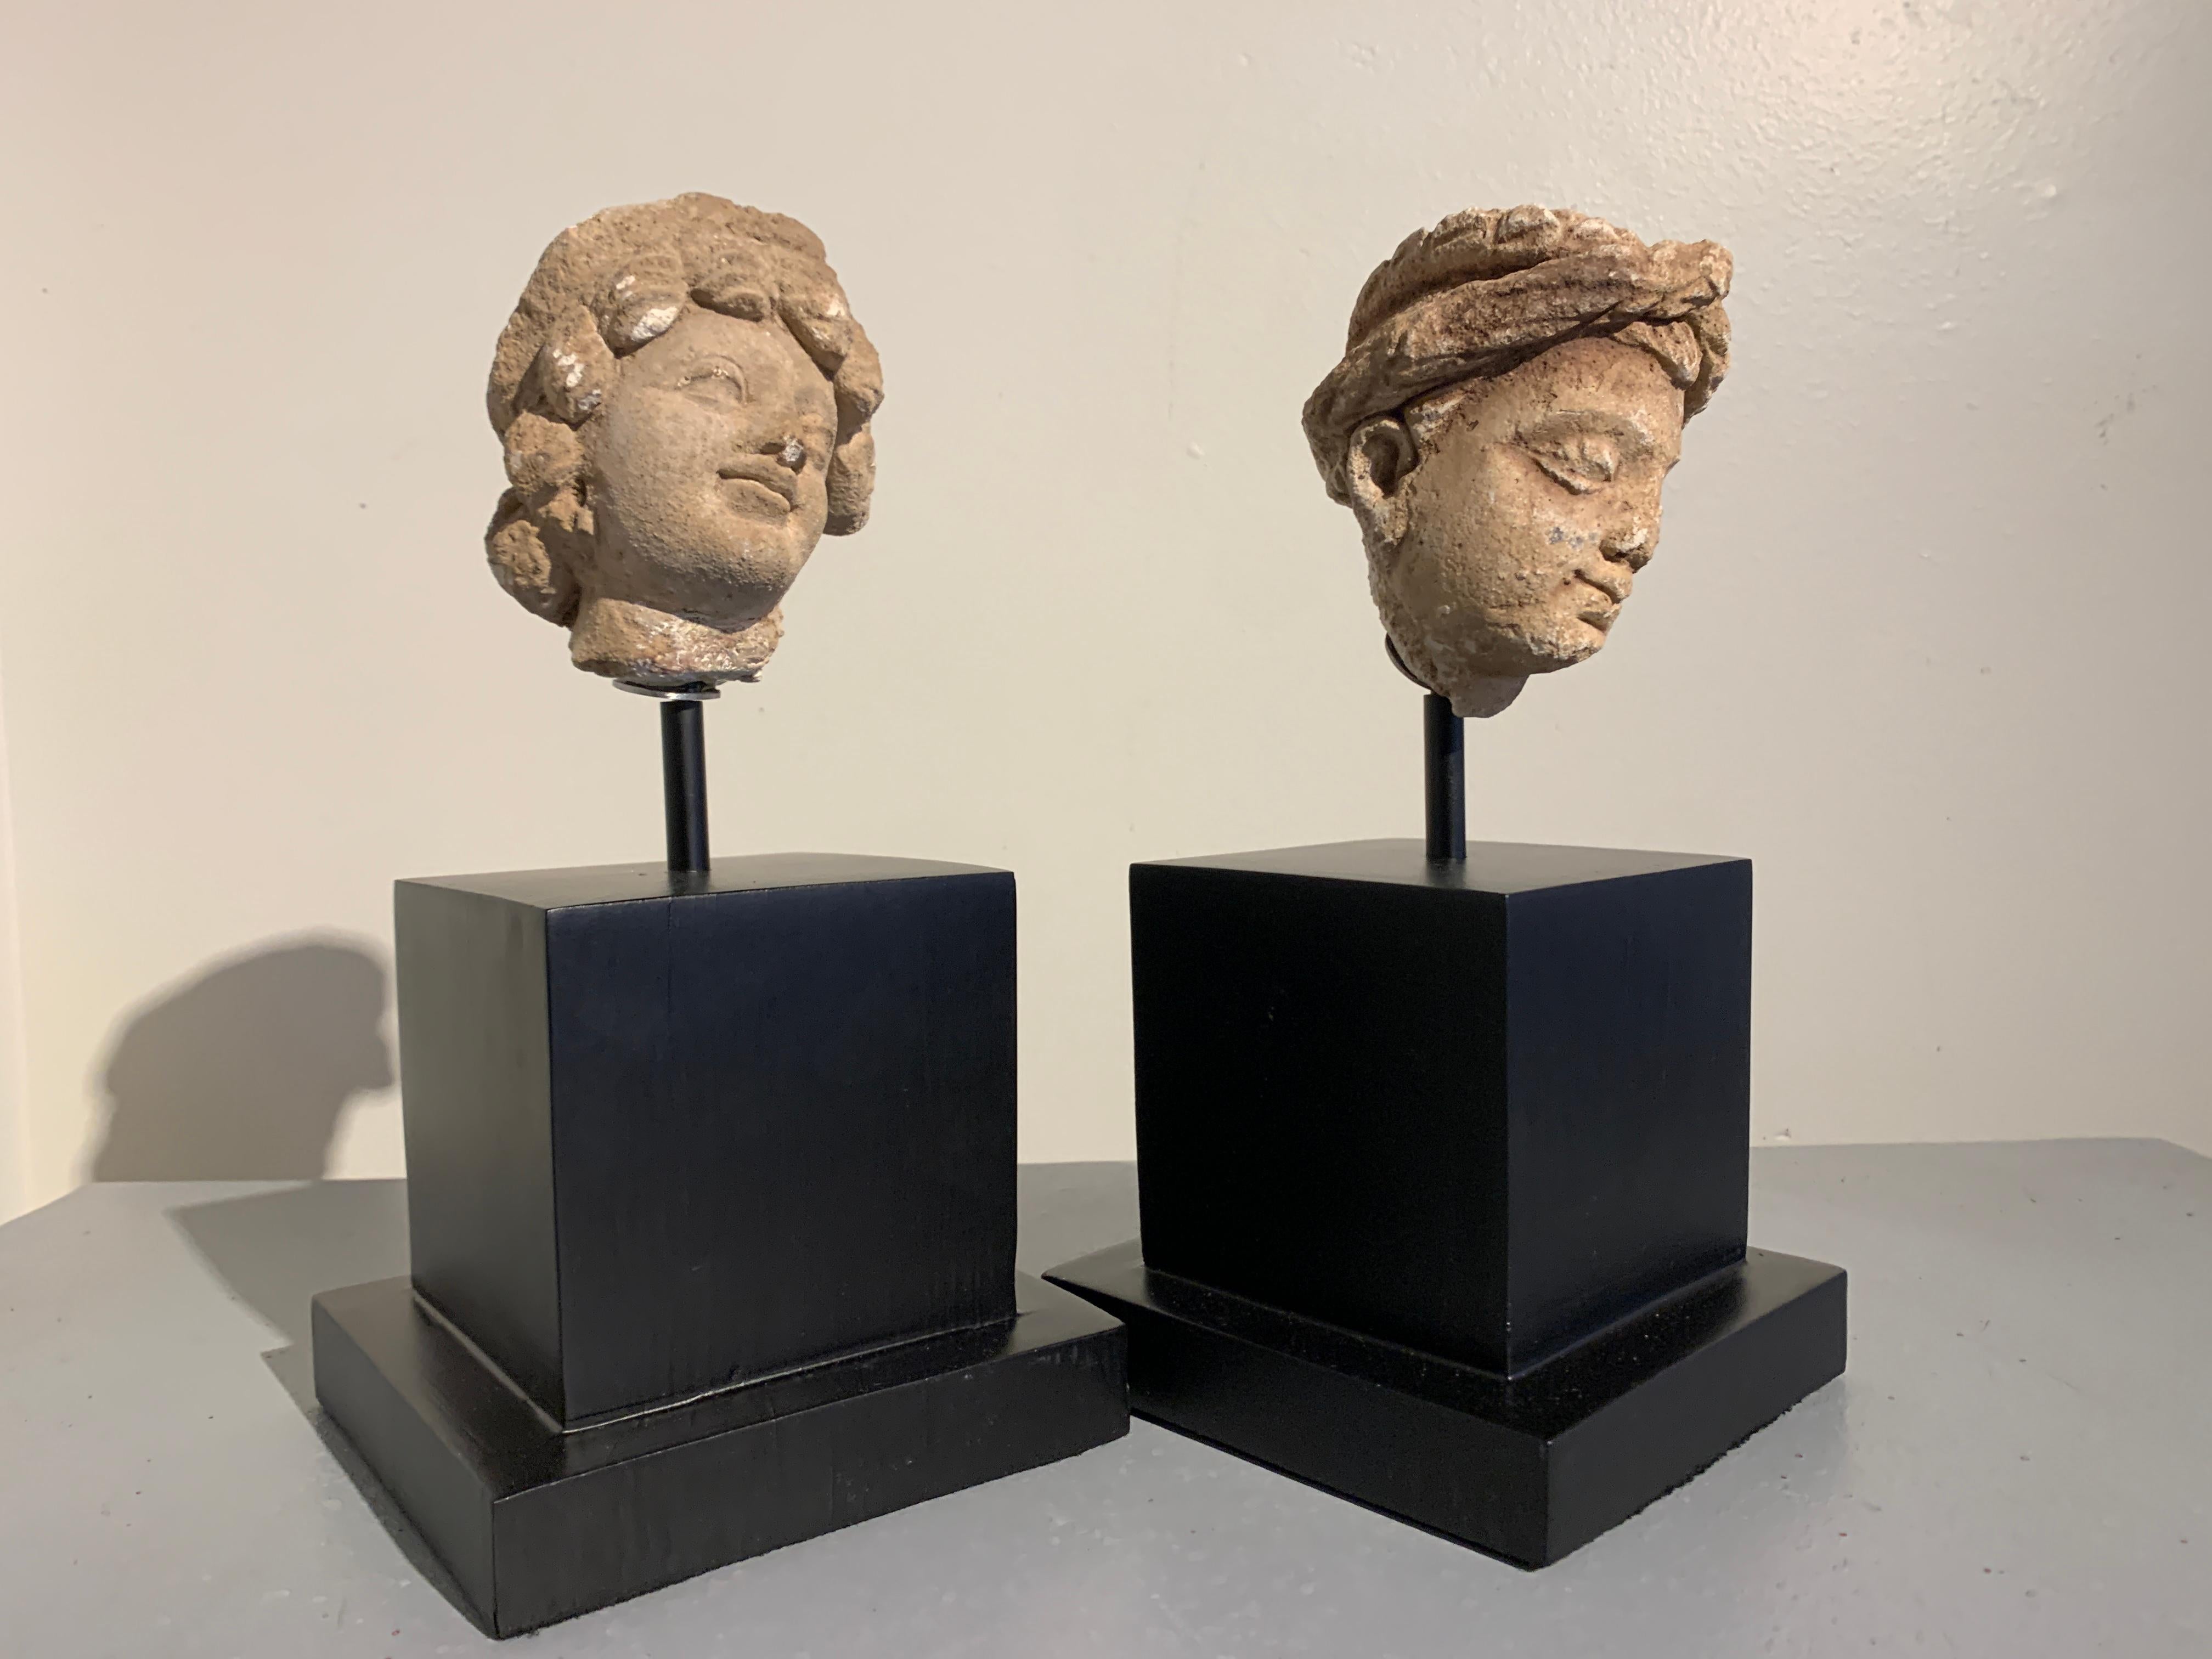 A charming pair of Gandharan molded stucco heads of donors, ancient region of Gandhara (modern day Pakistan / Afghanistan), probably Taxila, circa 3rd-5th century. 

The two heads most likely represent donors. Donors to temples would often have